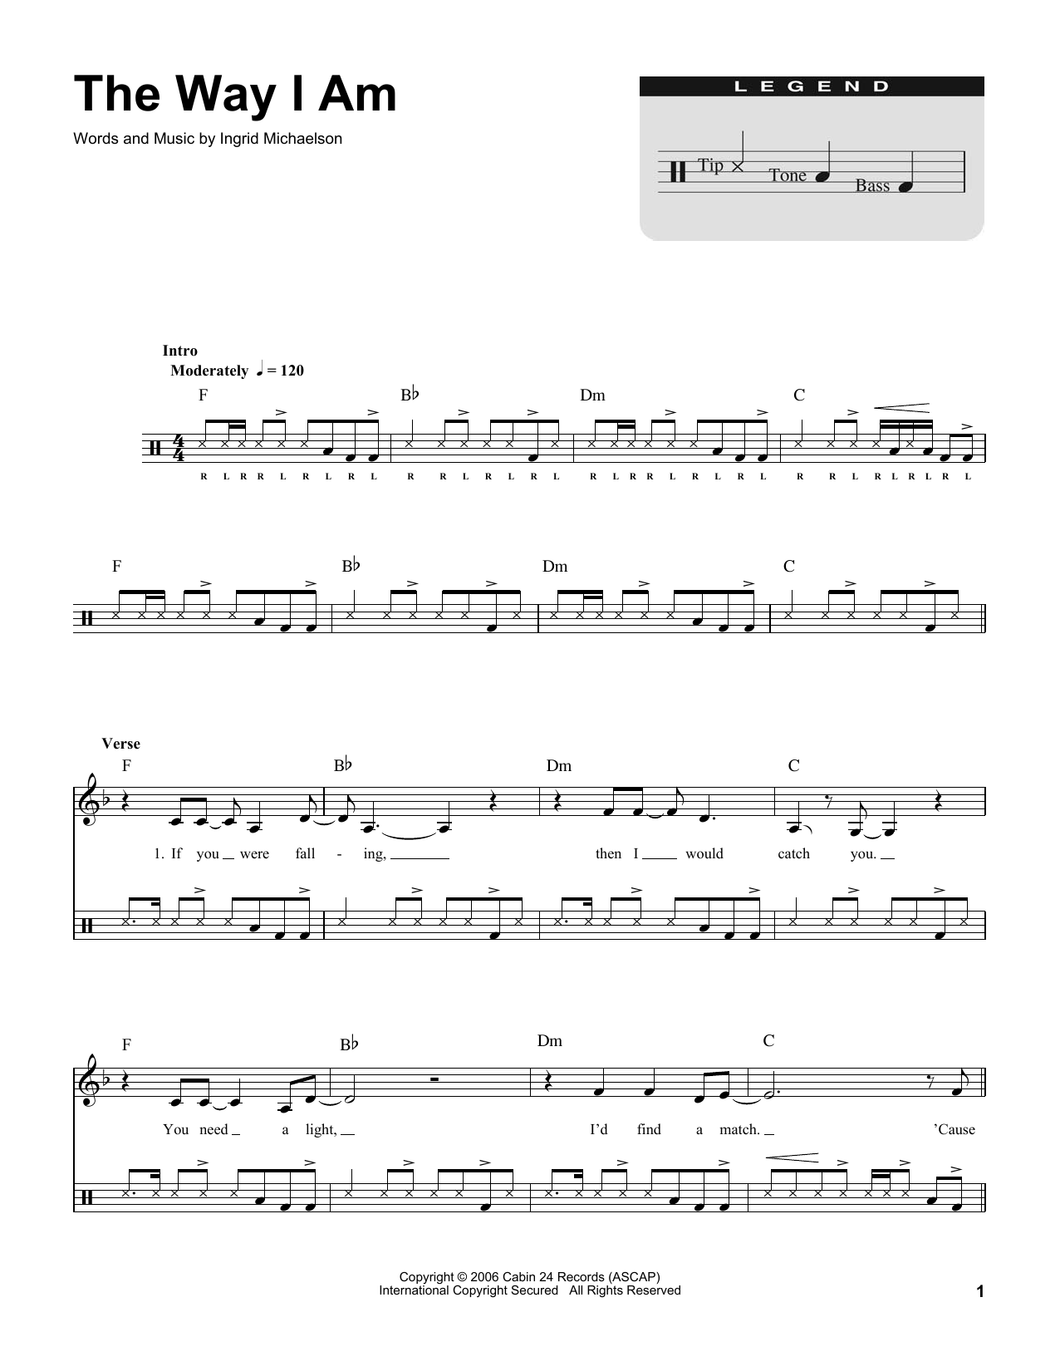 The Way I Am - Ingrid Michaelson - Full Drum Transcription / Drum Sheet Music - SheetMusicDirect DT